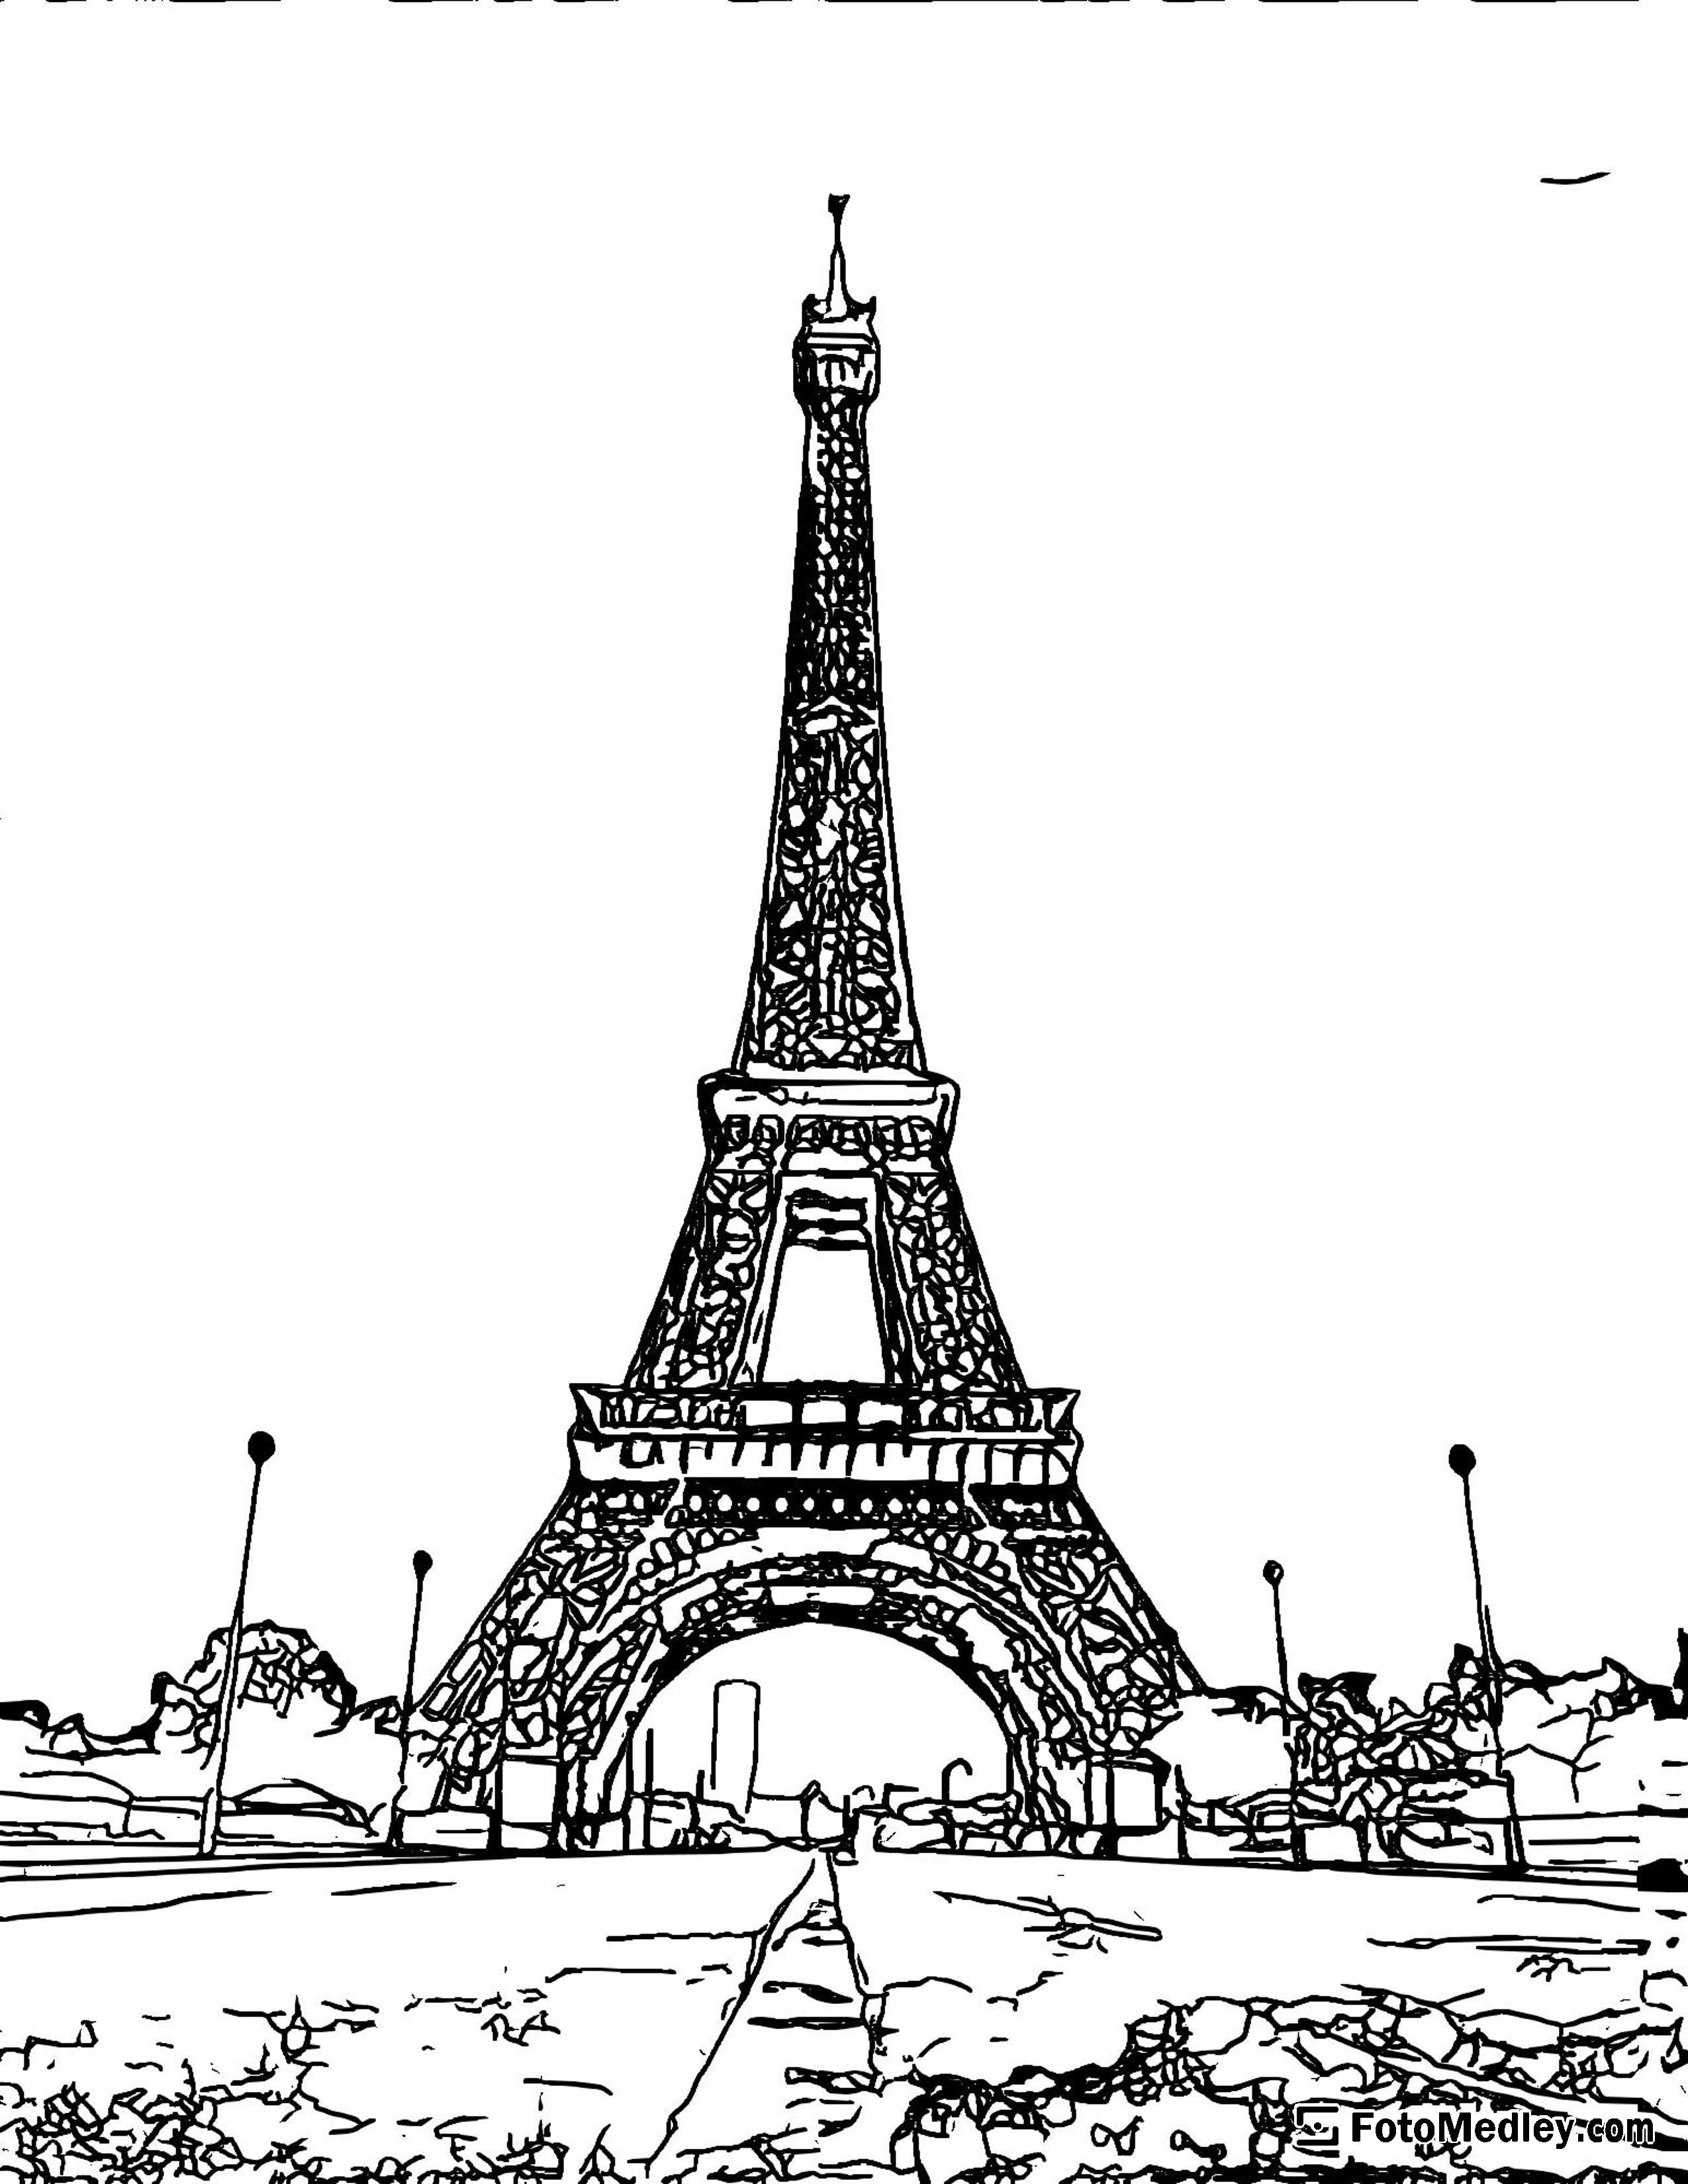 A coloring page of a view of the Eiffel Tower in Paris.